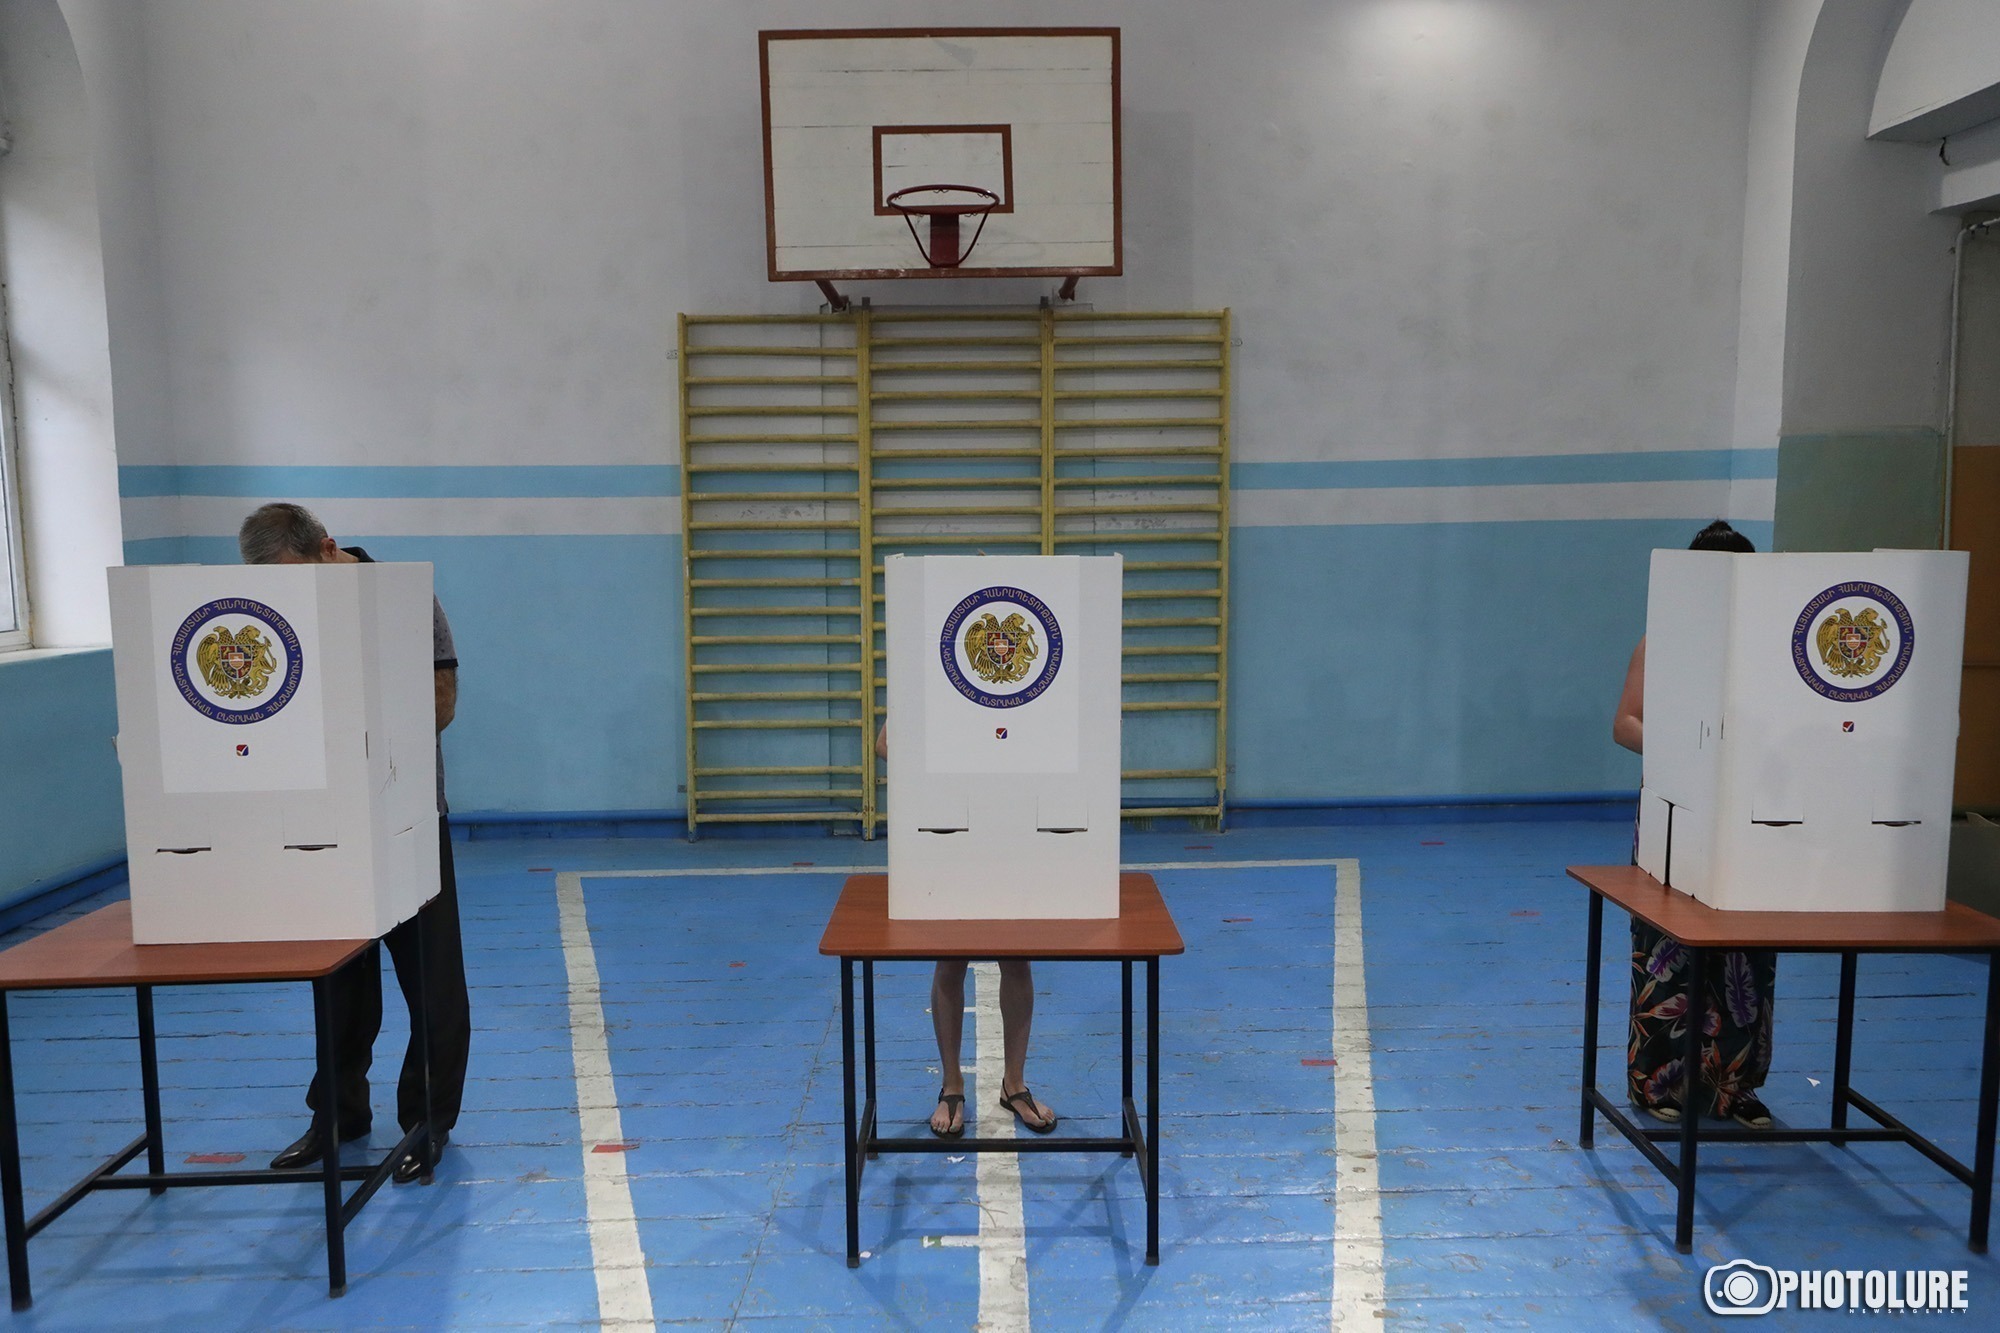 Armenia Voted: Now What?